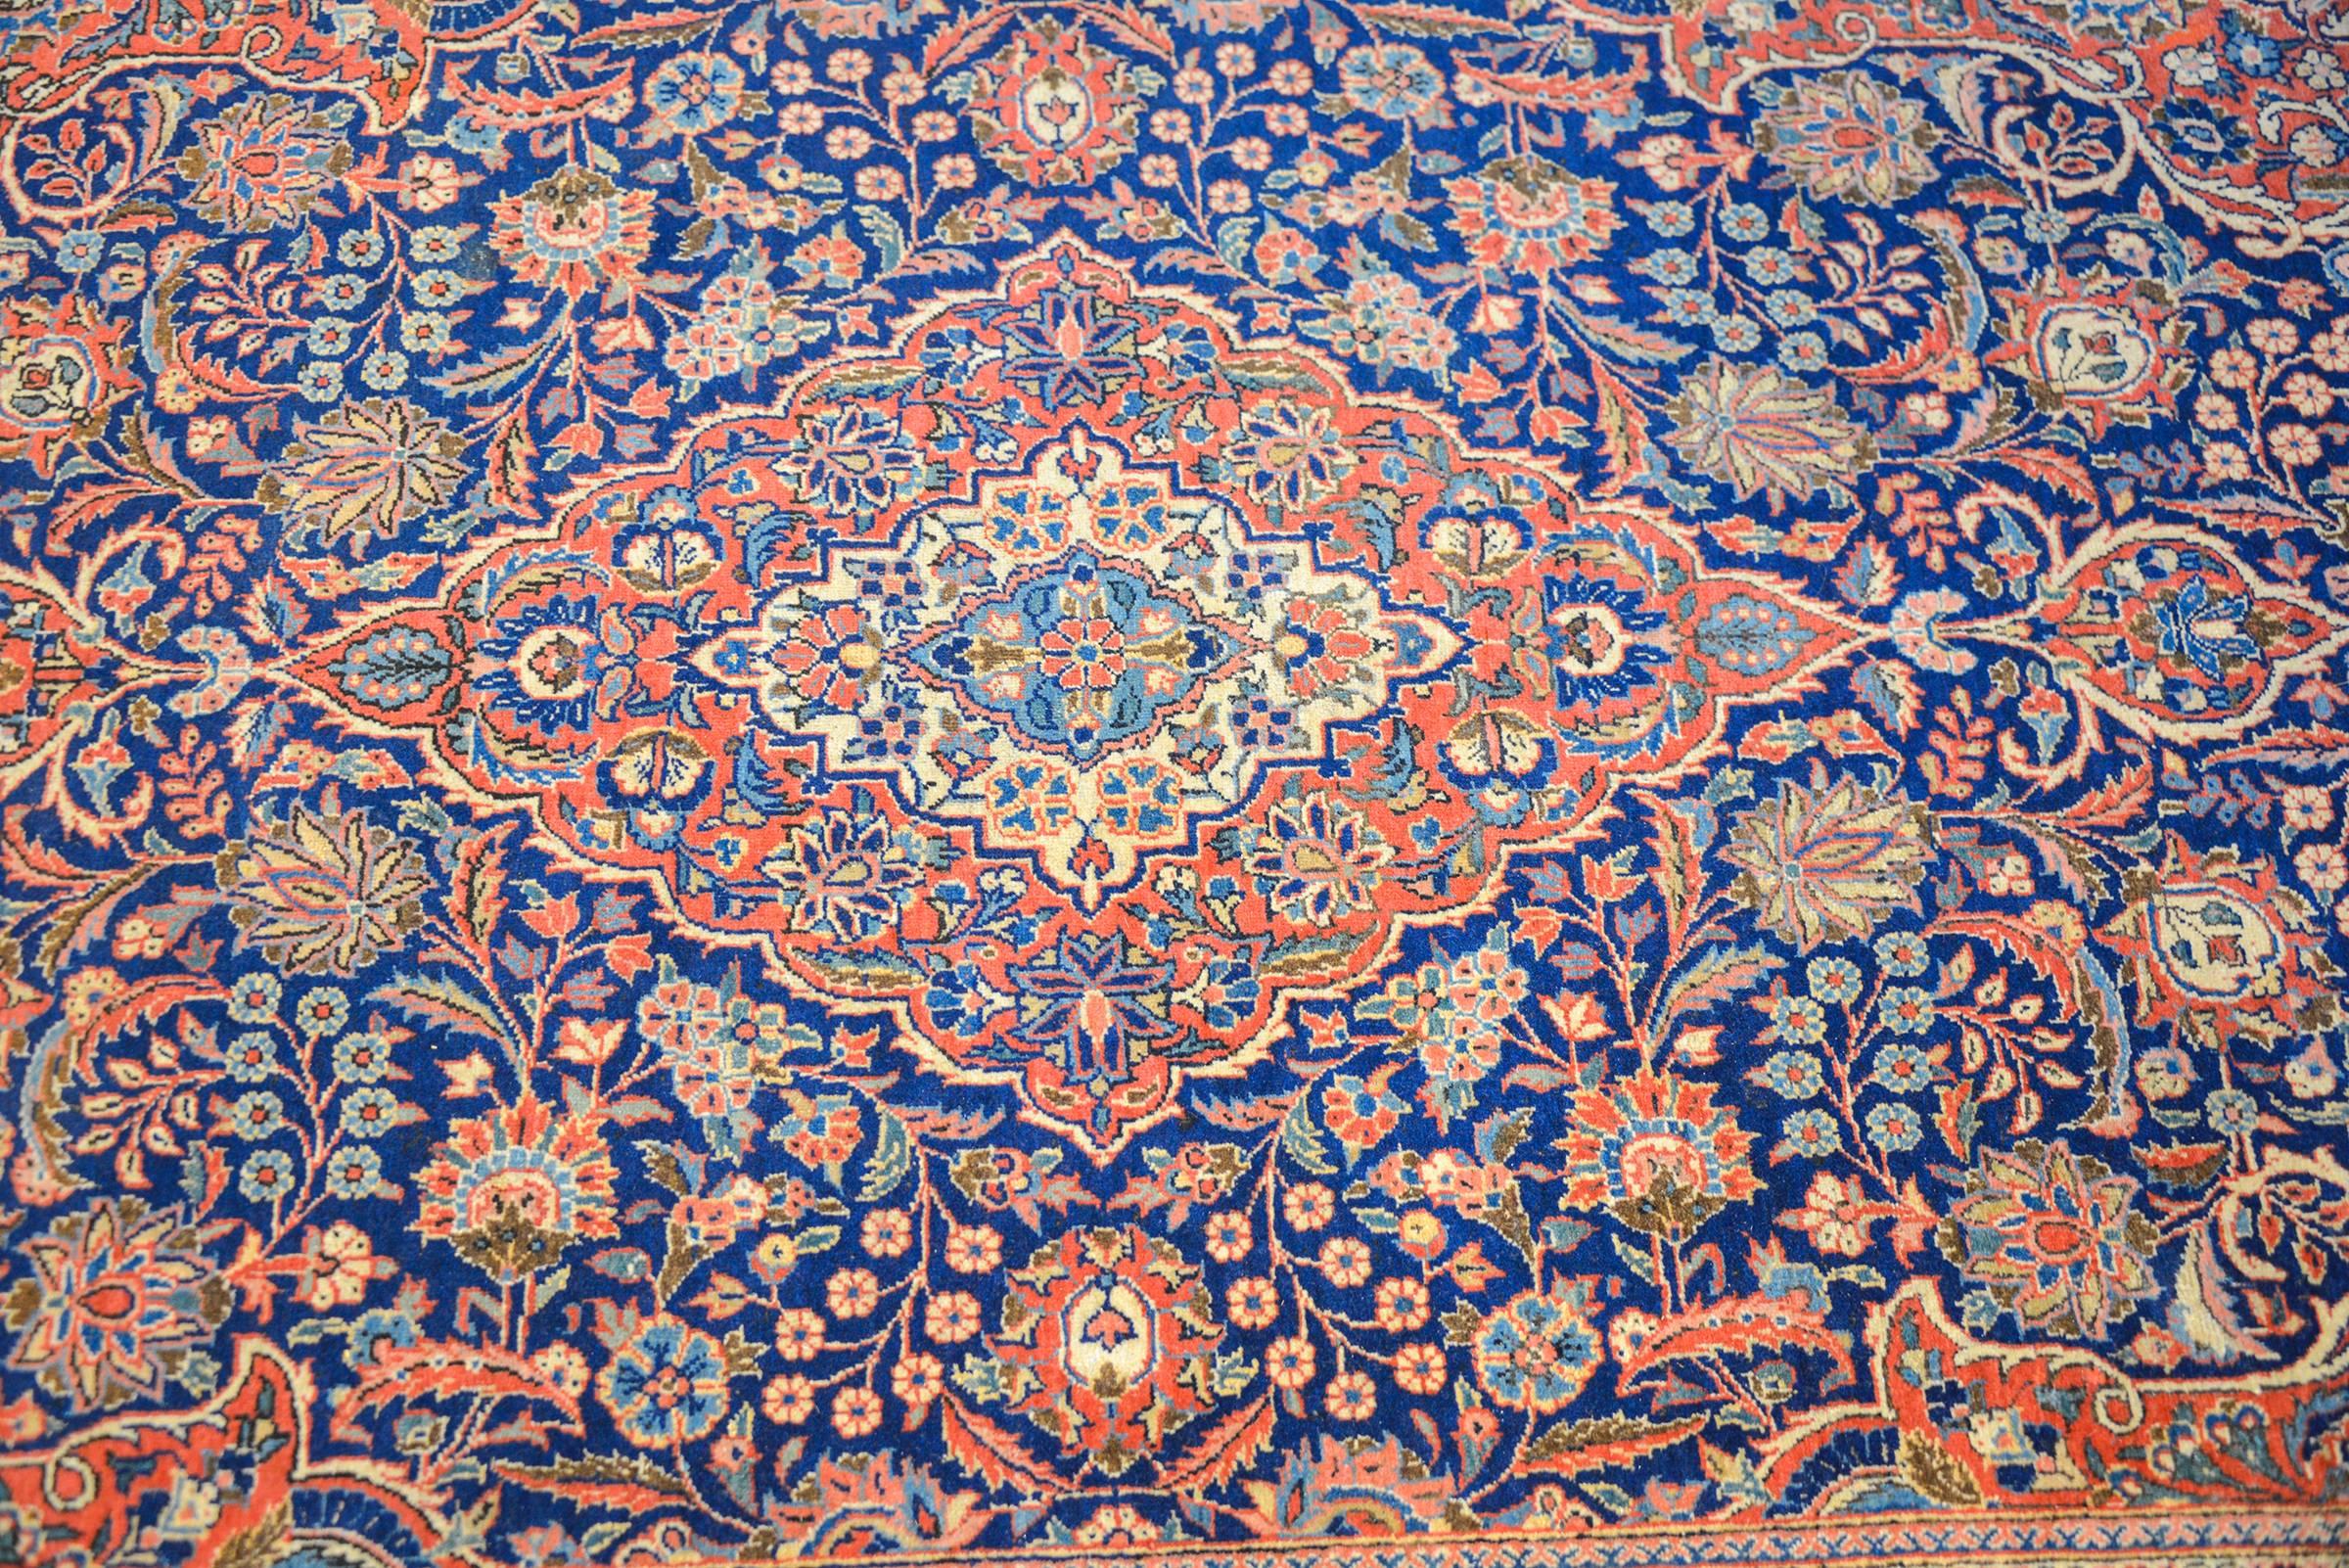 An amazing early 20th century Persian Kashan rug with an intense densely woven all-over large and small-scale floral and vine patterns rendered in crimson, indigo and natural wool colors. The border is complementary with large-scale flowers and